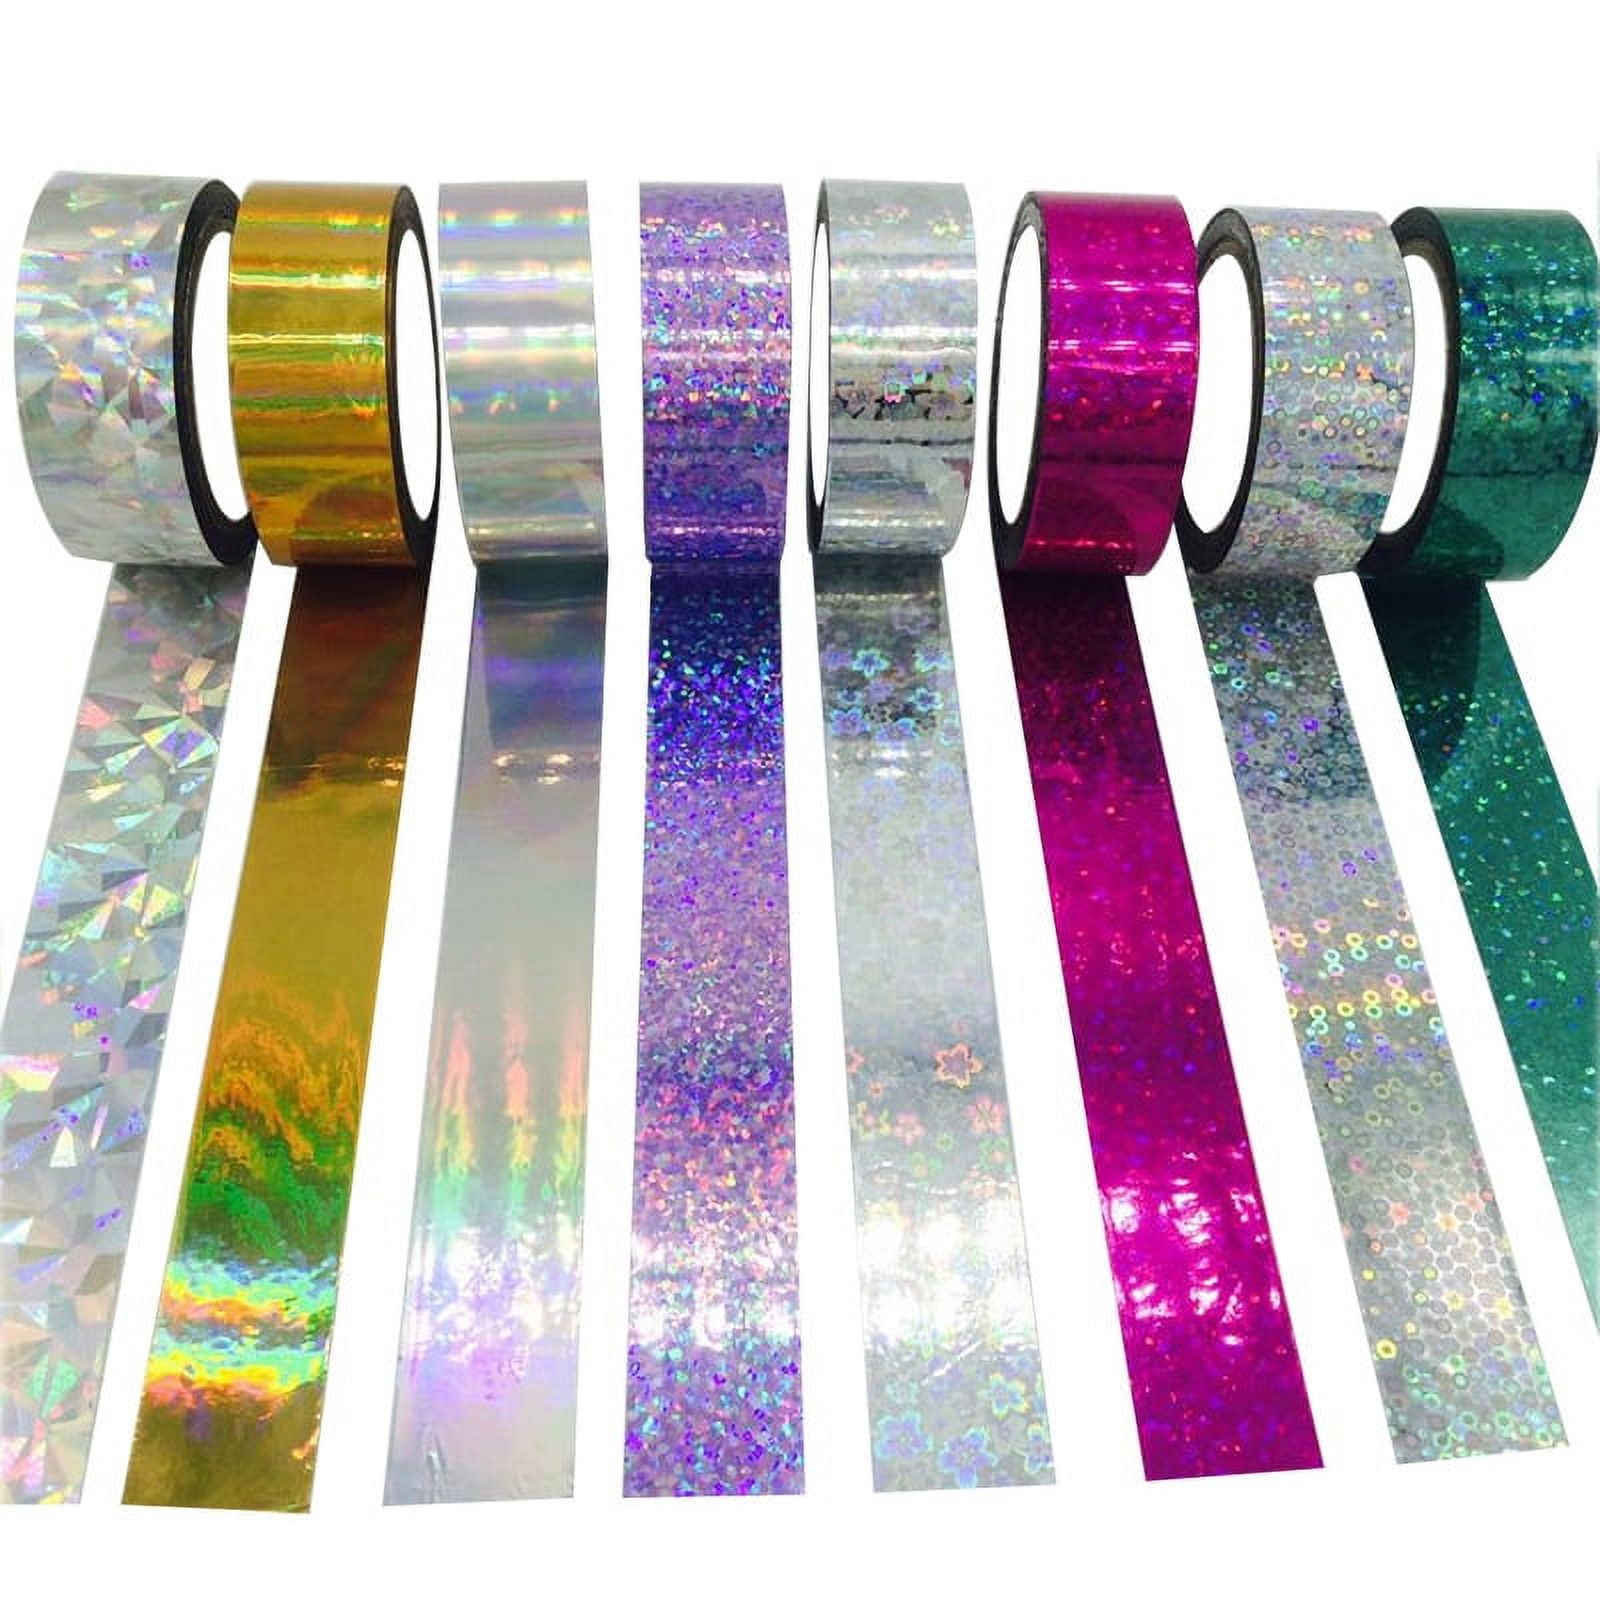 tooloflife 1/2pcs Holographic Hoop Tape Reflective Adhesive Film